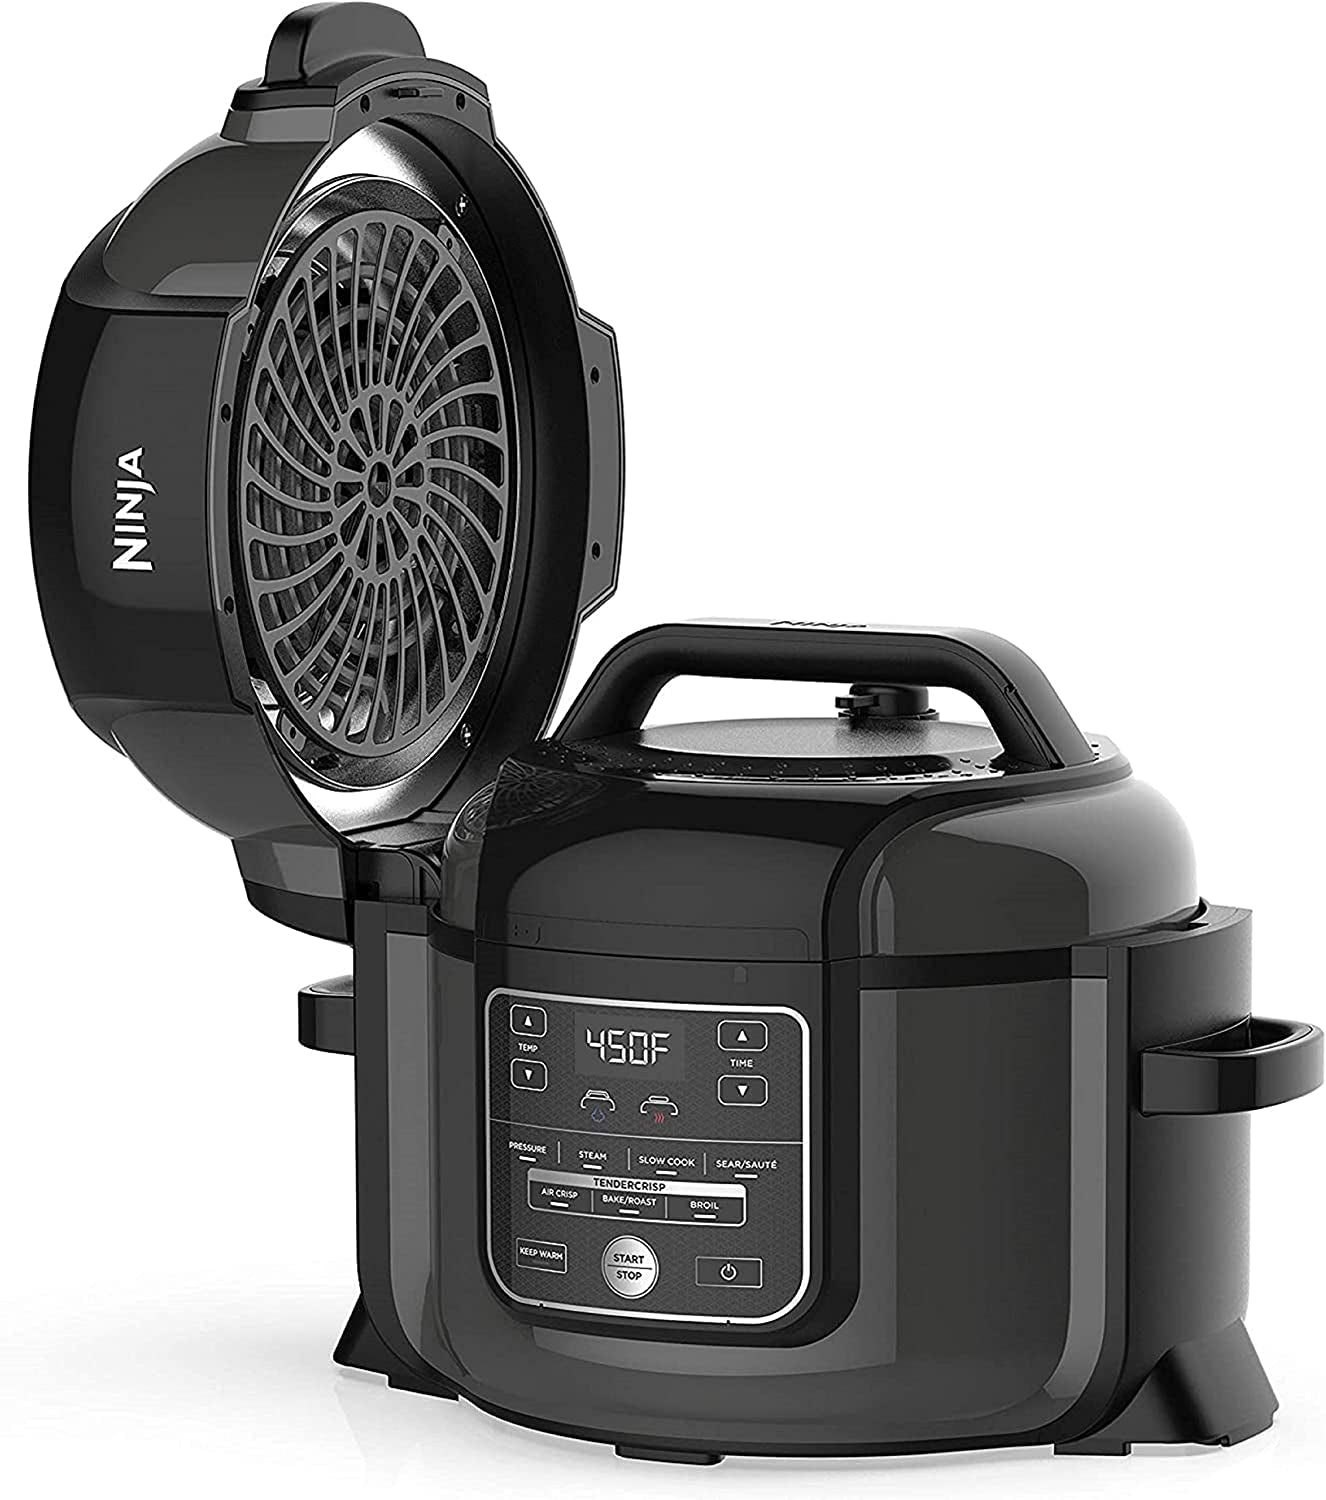 NINJA OP301 Foodi 9-In-1 Pressure, Slow Cooker, Air Fryer and More, with 6.5 Quart Capacity and a High Gloss Finish (Renewed)